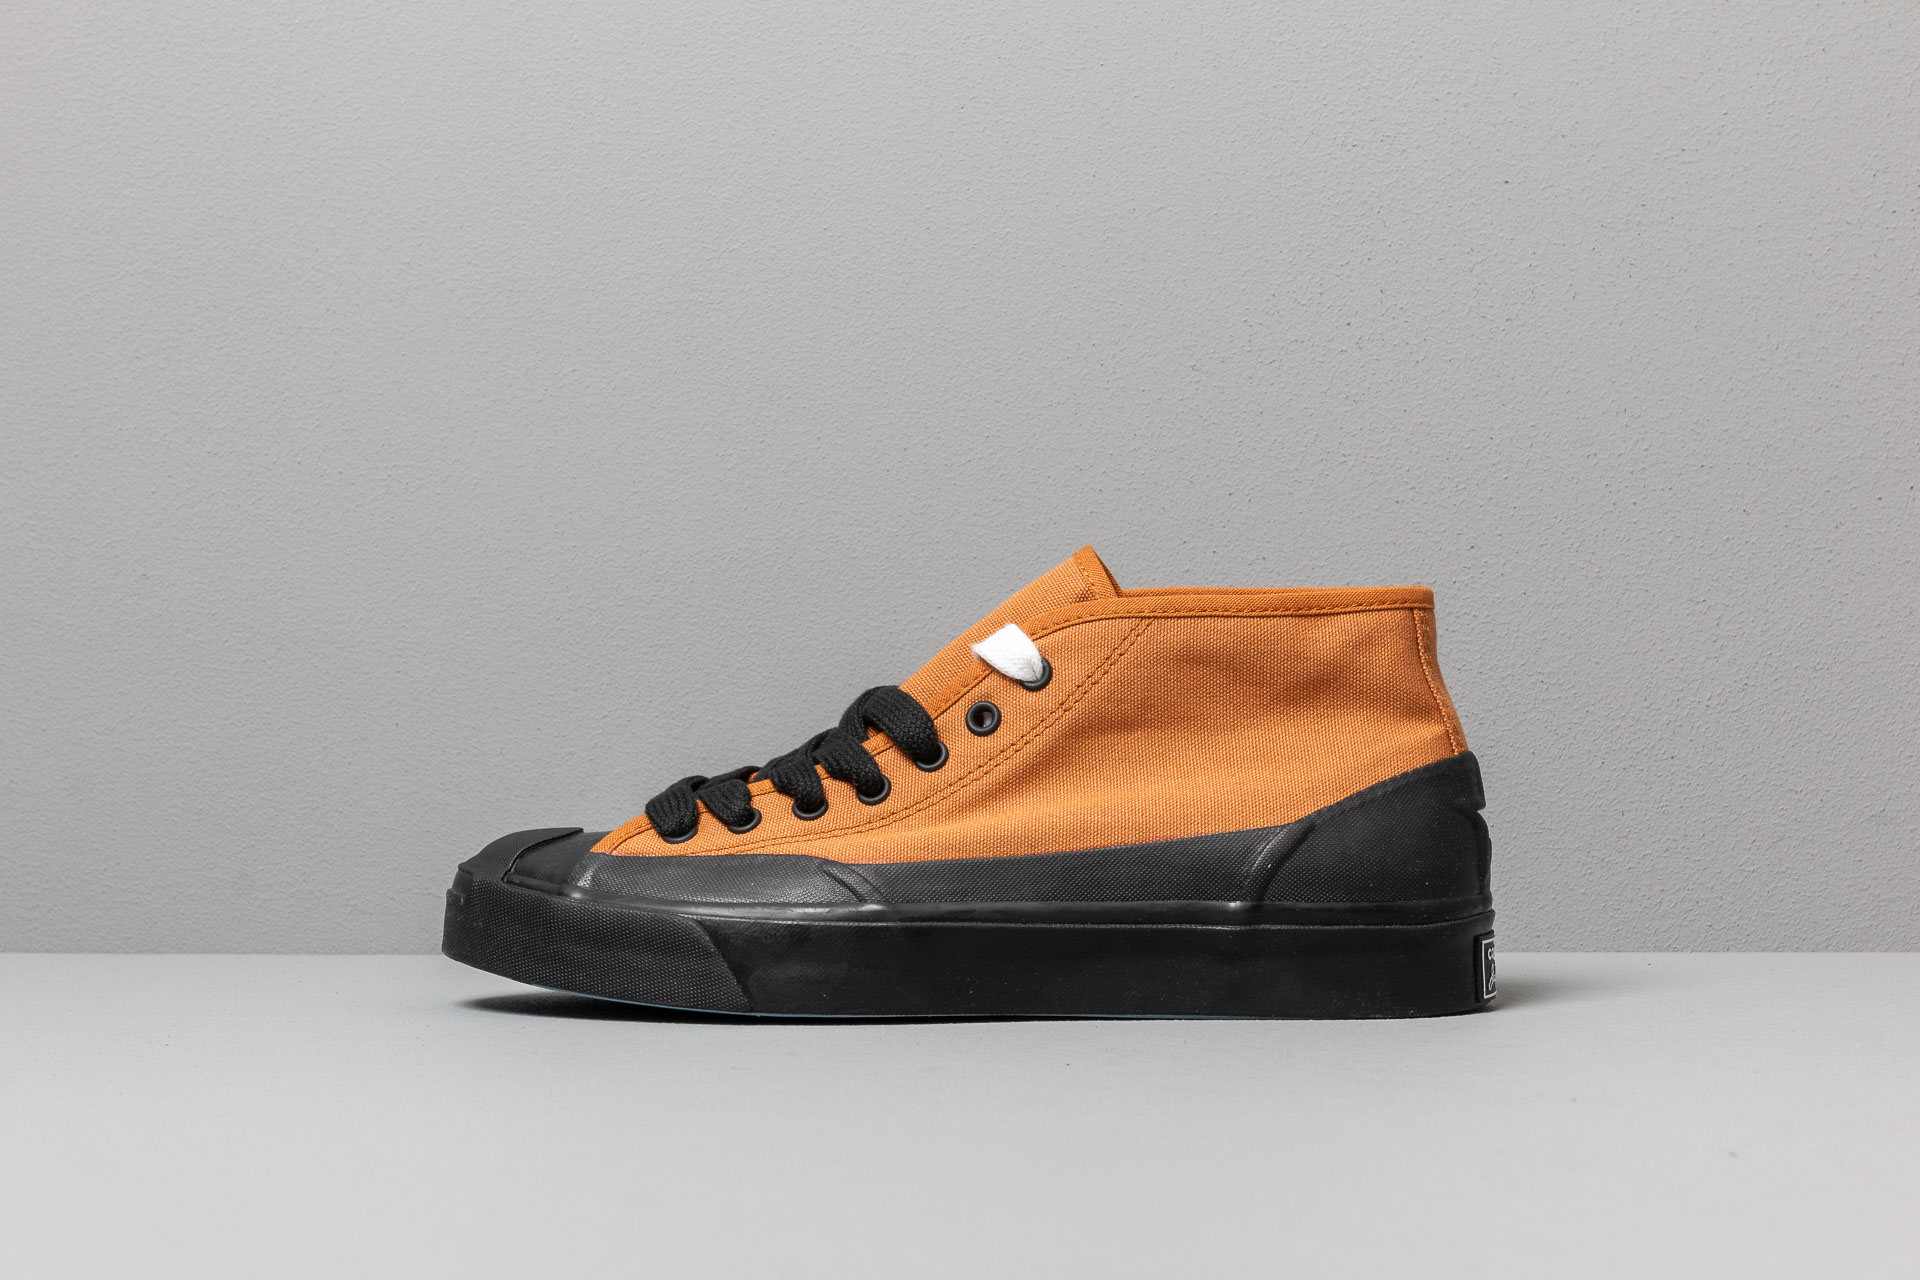 Converse X A Ap Nast Jack Purcell Chukka Mid Pumpkin Spice Black White Footshop Releases